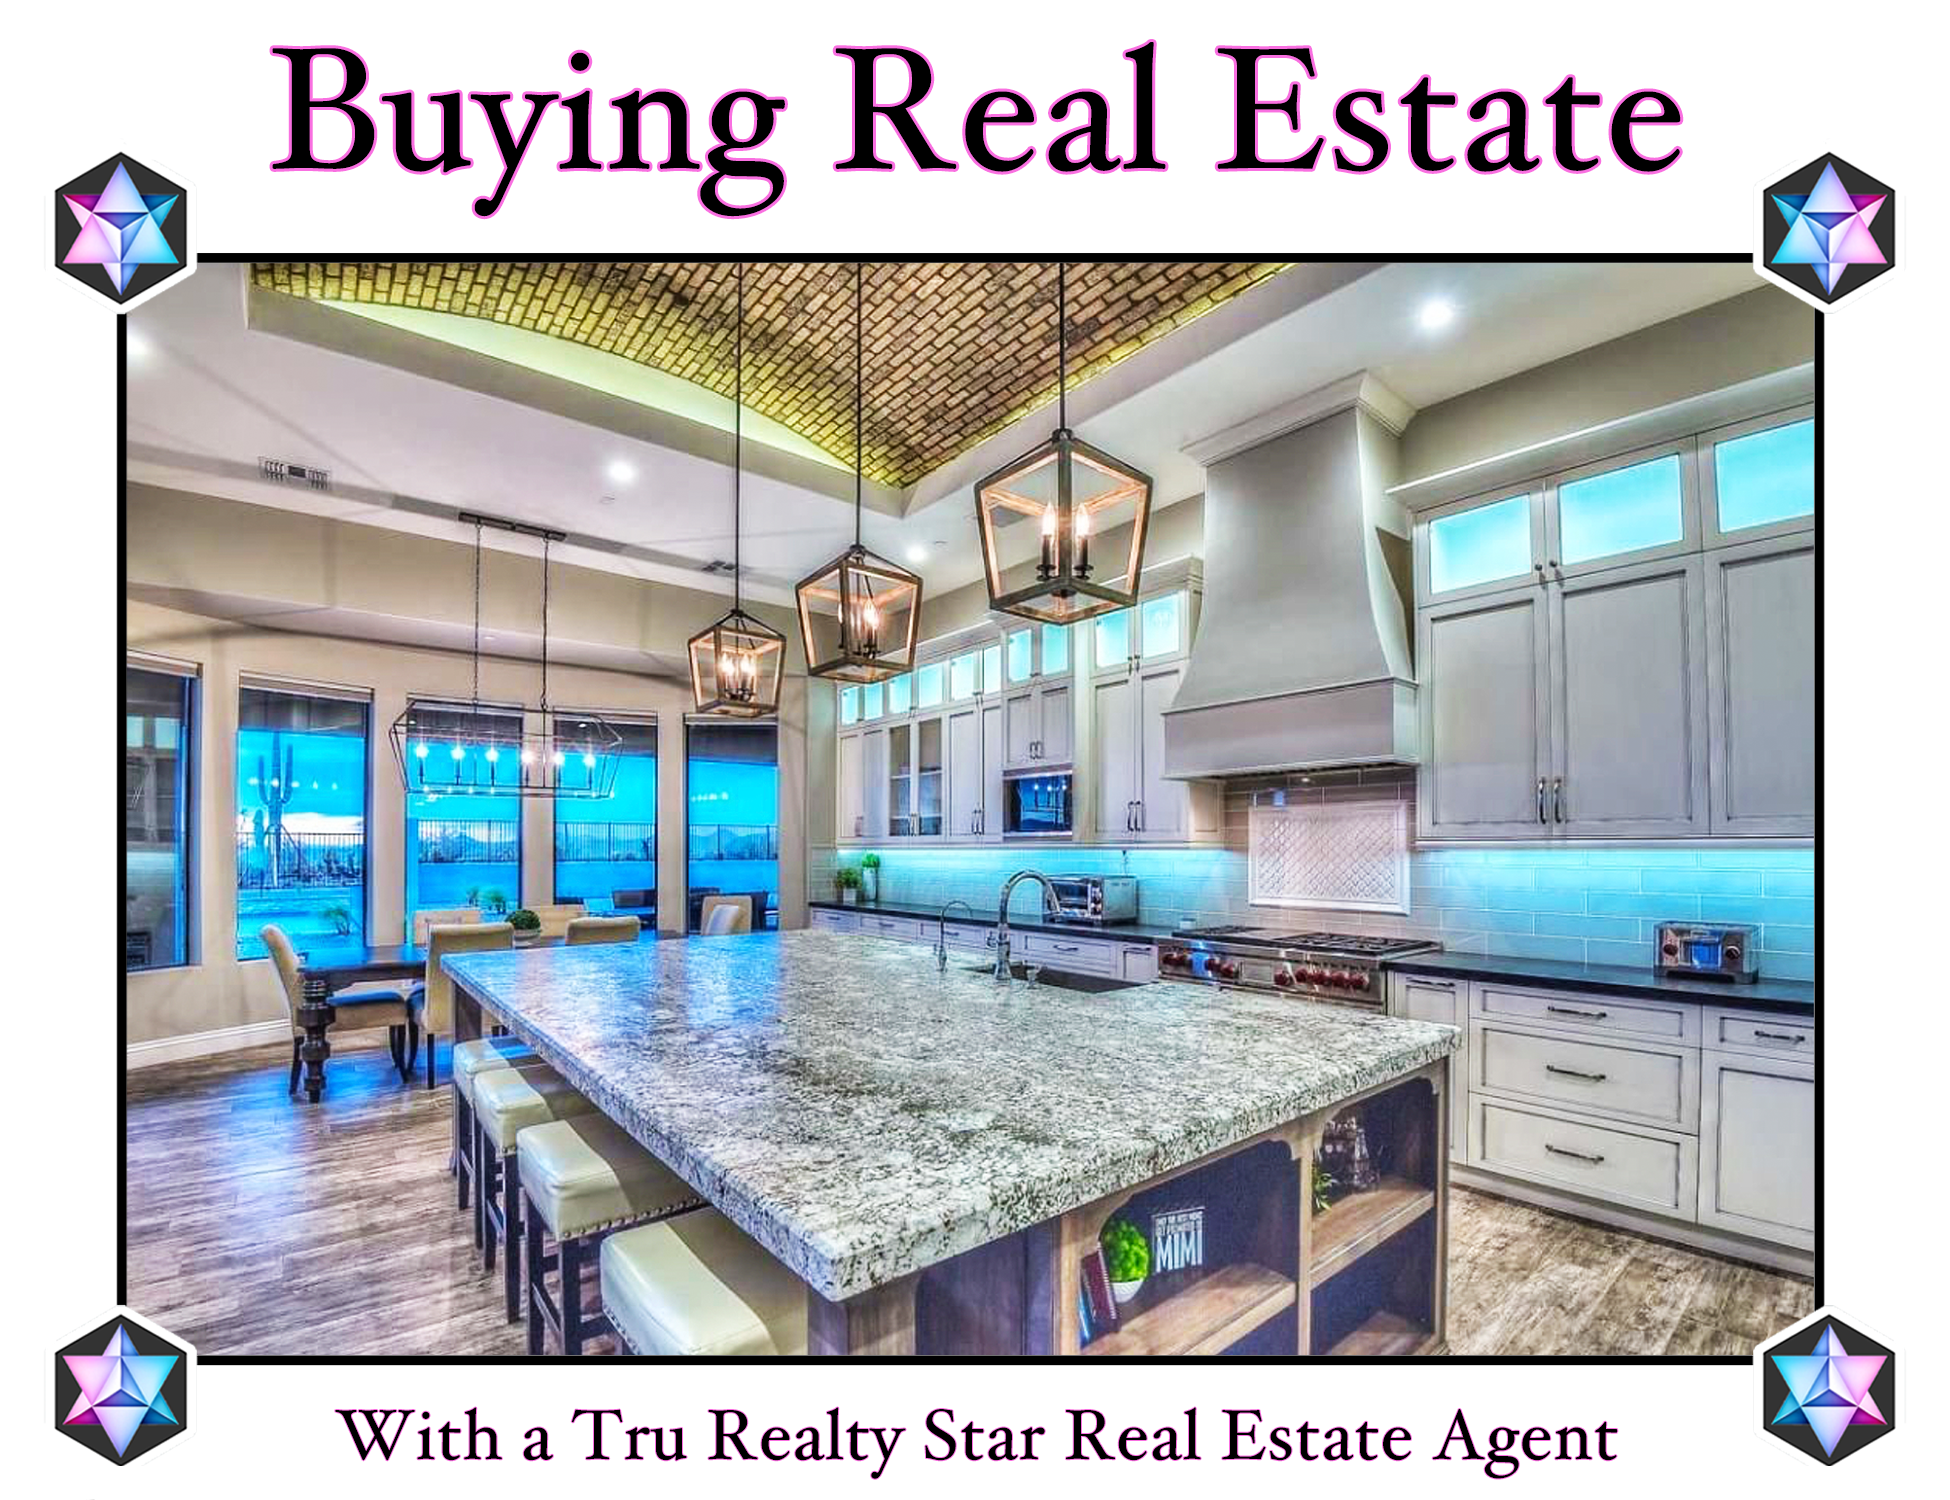 I am a Tru Realty Star Real Estate Agent helping people buy, sell, rent, and invest in Arizona's North Phoenix areas of Anthem, Carefree, Cave Creek, Glendale, Fountain Hills, Paradise Valley, Peoria, Scottsdale, and Surprise